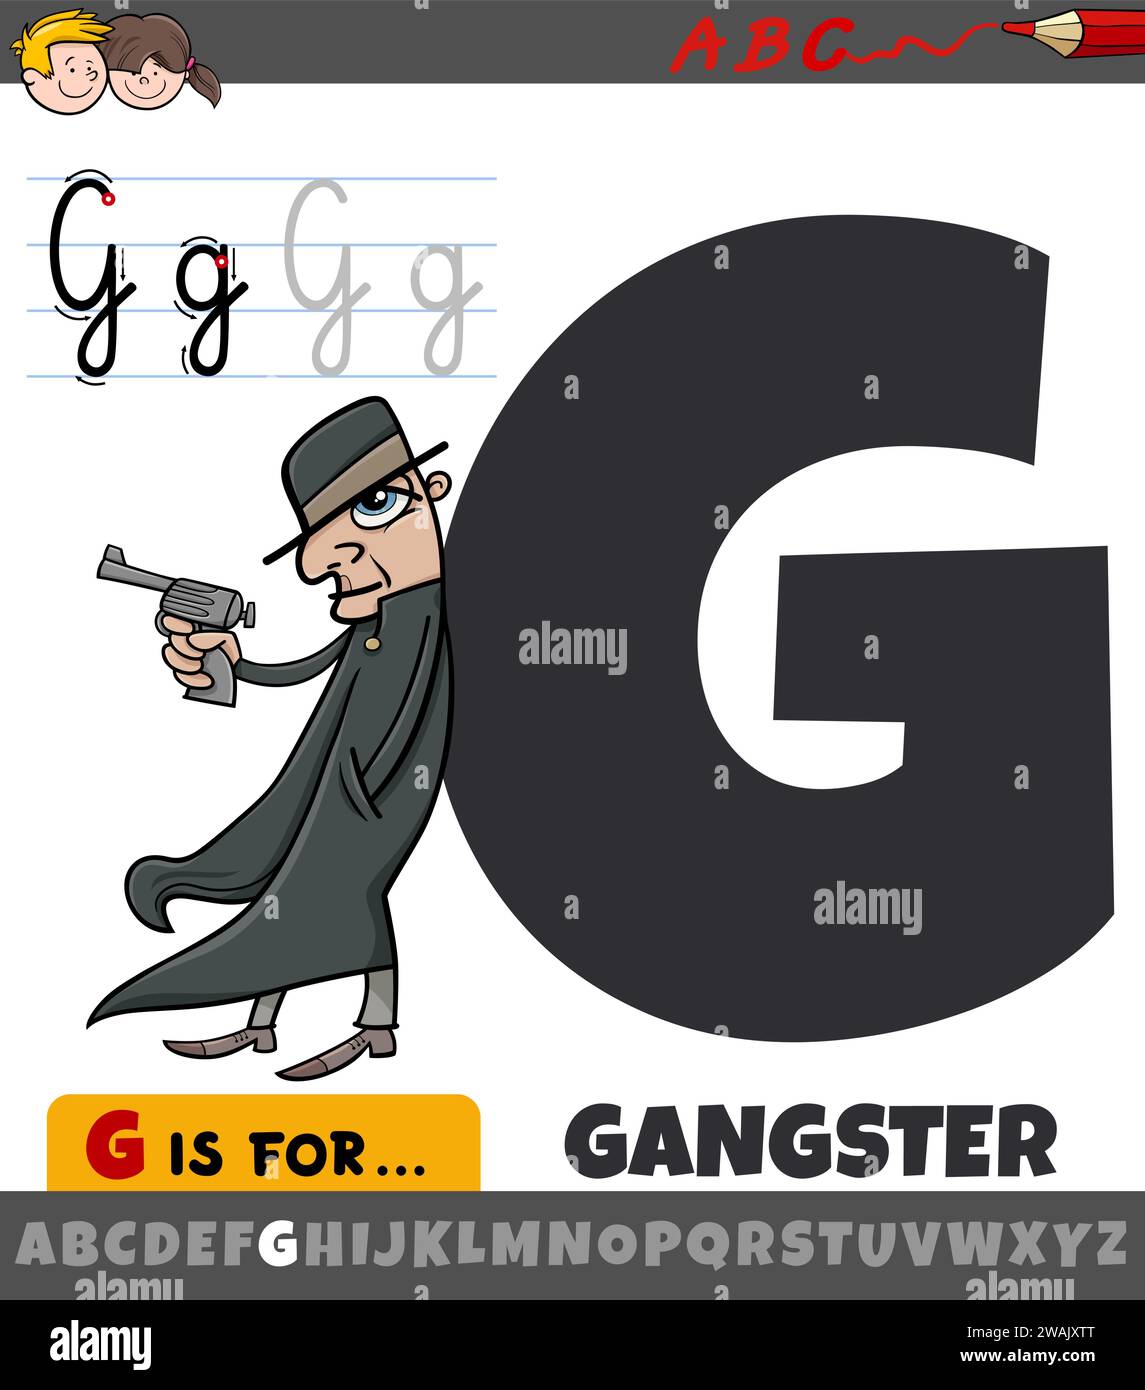 Educational cartoon illustration of letter G from alphabet with gangster character Stock Vector